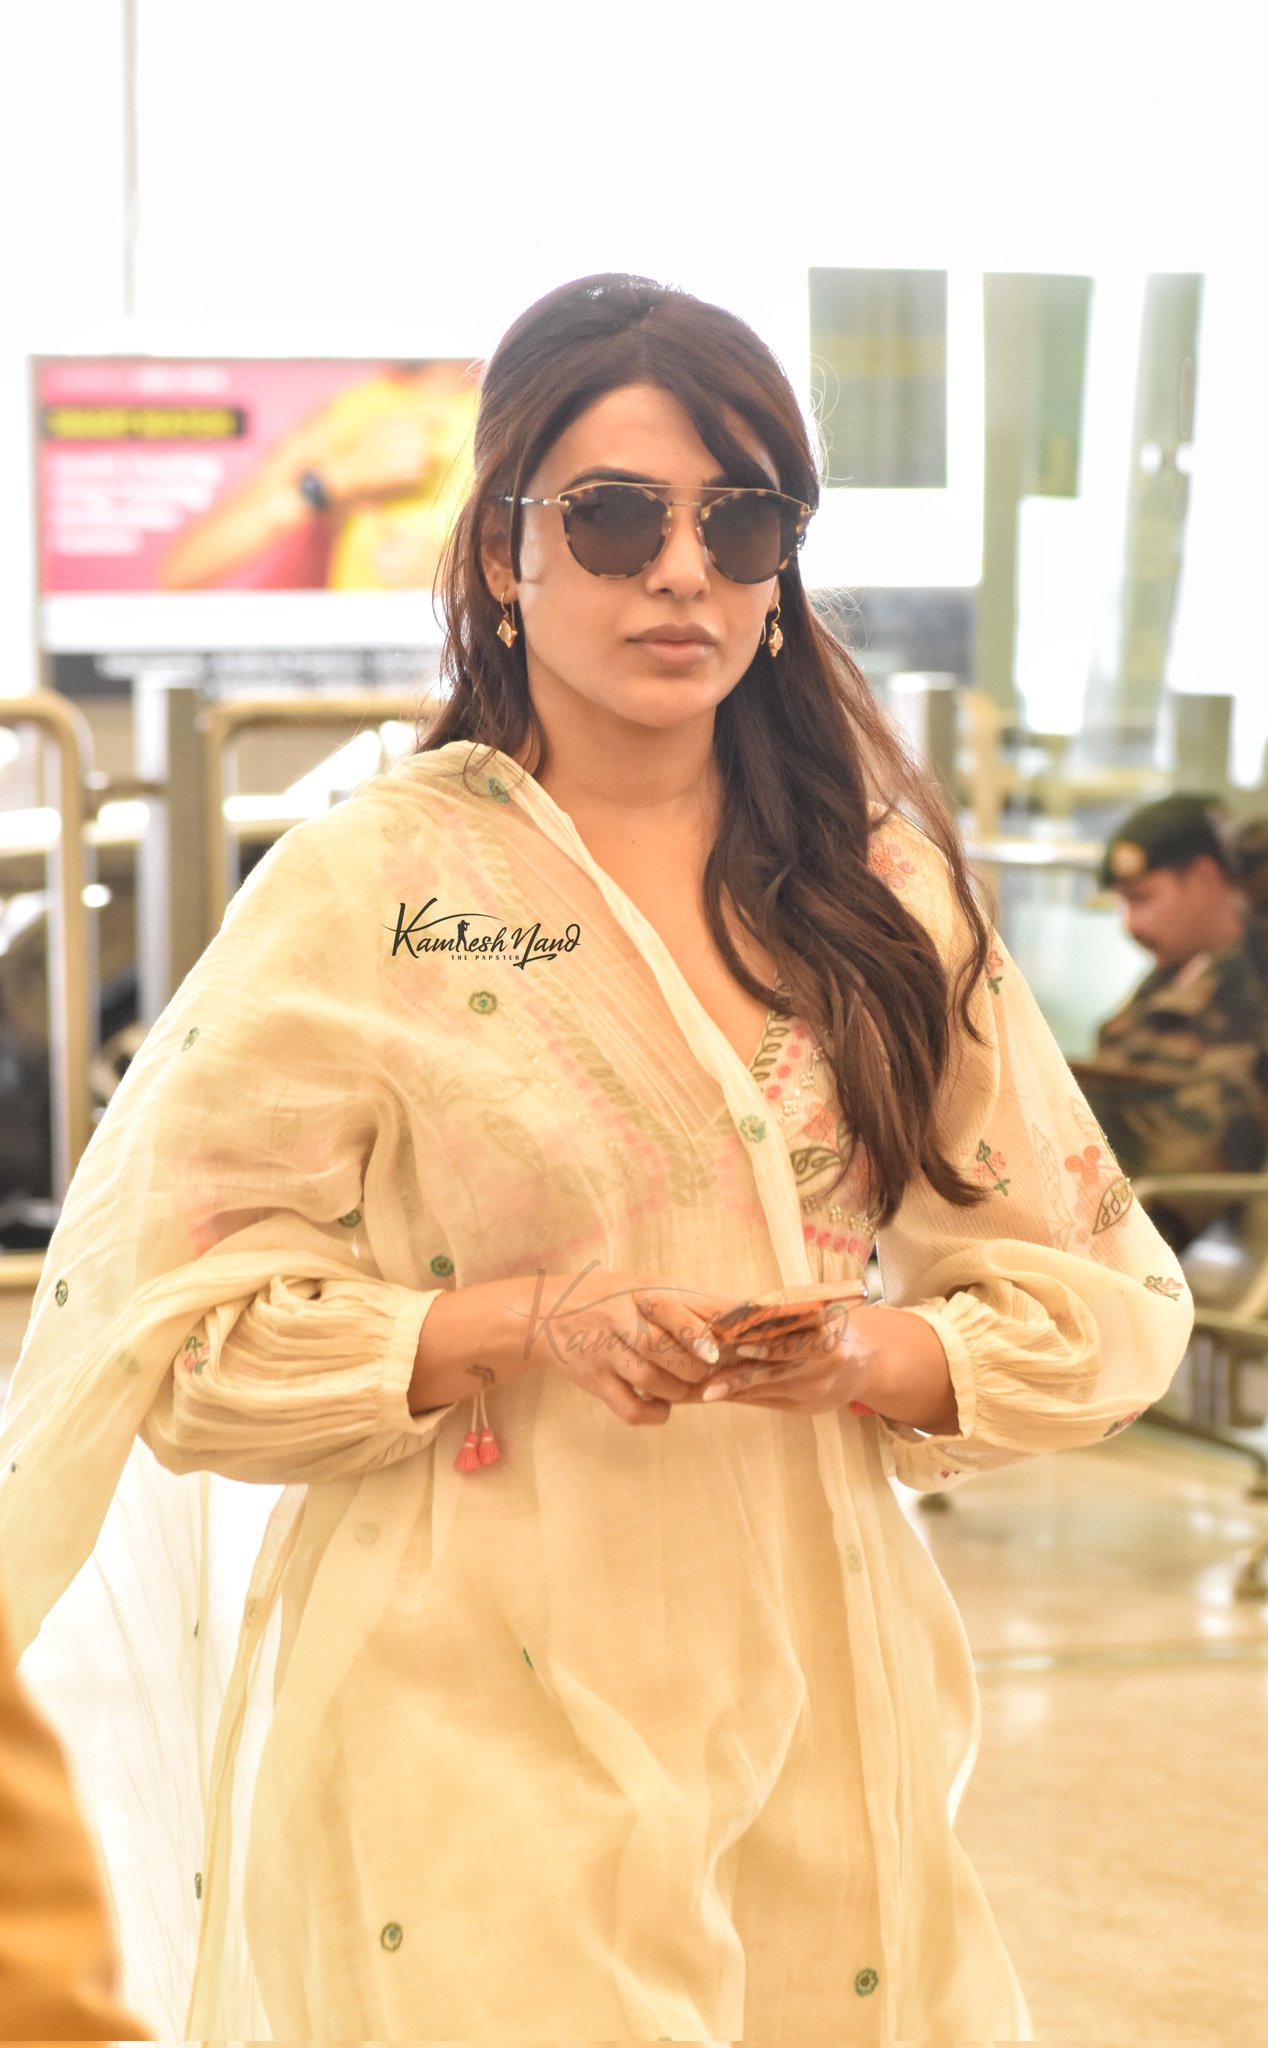 Samantha Ruth Prabhu Spent More Than Rs 2 Lakh On Slippers At Hyderabad  Airport Viral Pic Slipper Cost - Filmibeat